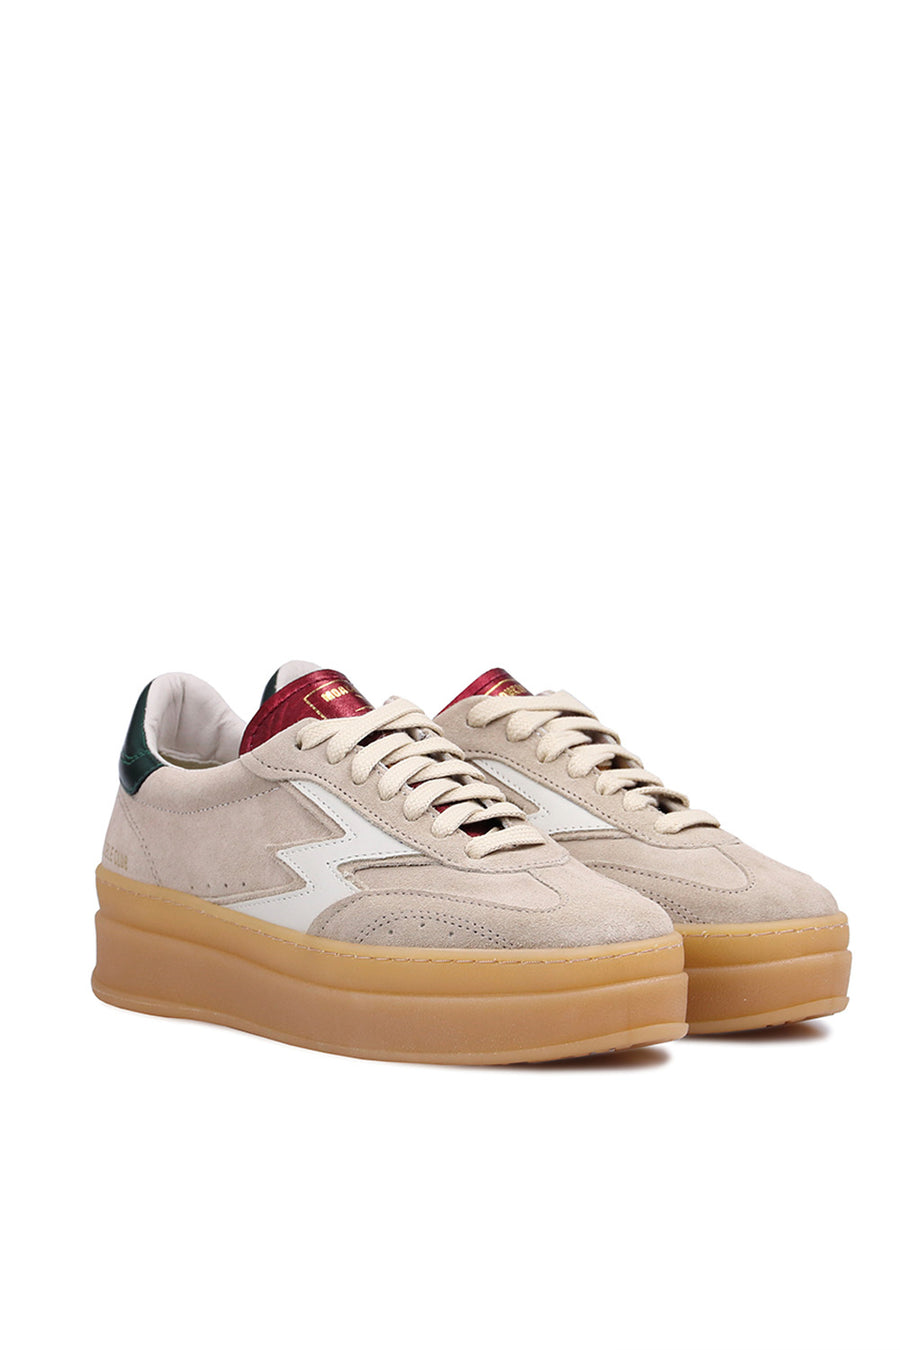 Sneakers Moa Concept beige mg520